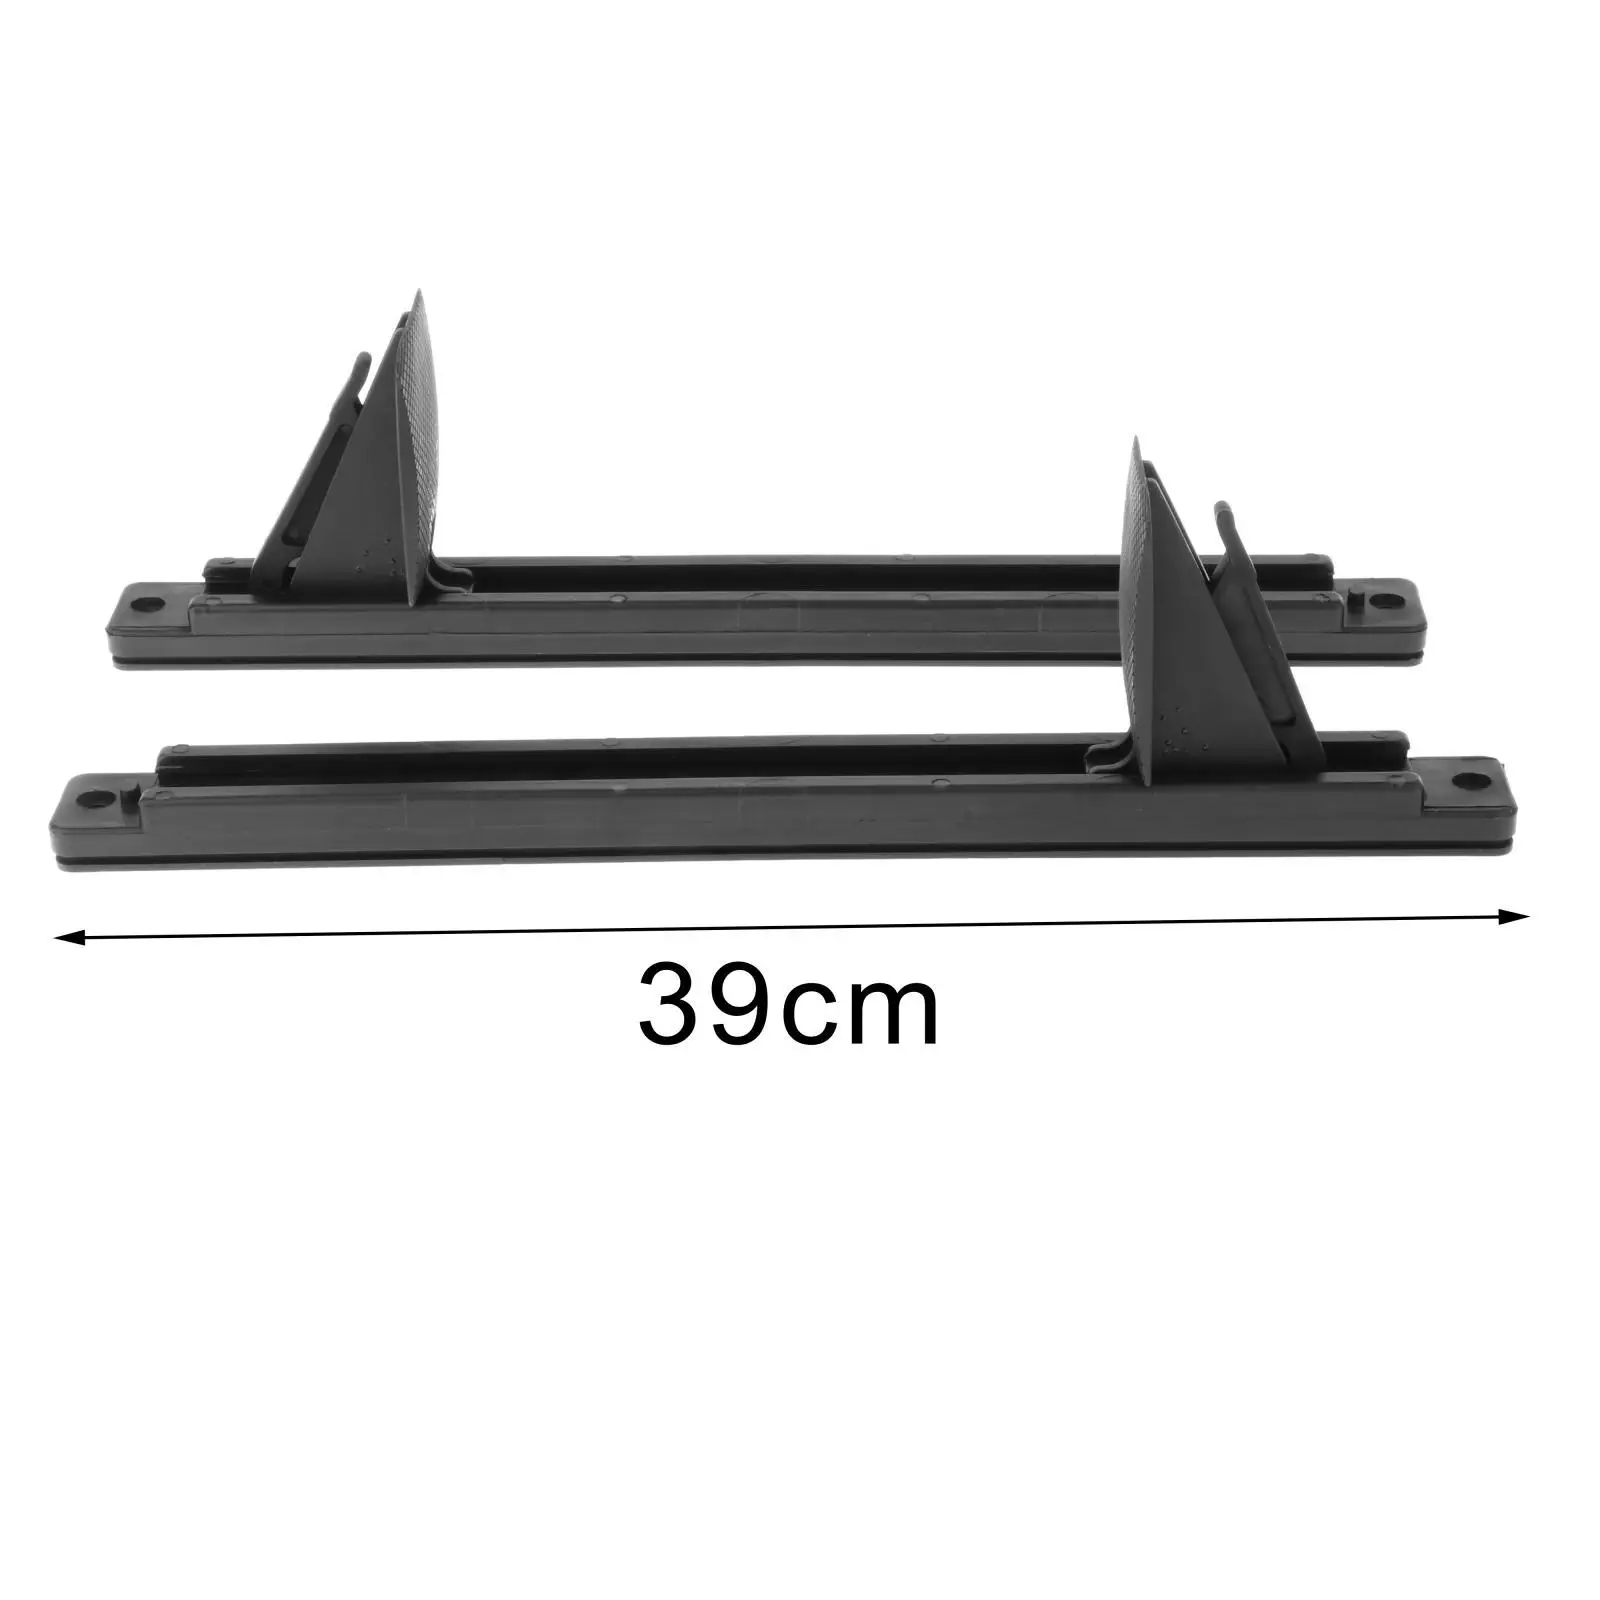 Kayak Foot Pegs Black Finish Nylon Universal Set of 2 Replacement Kayak Accessories Easy to Install Footrest Foot Pedals